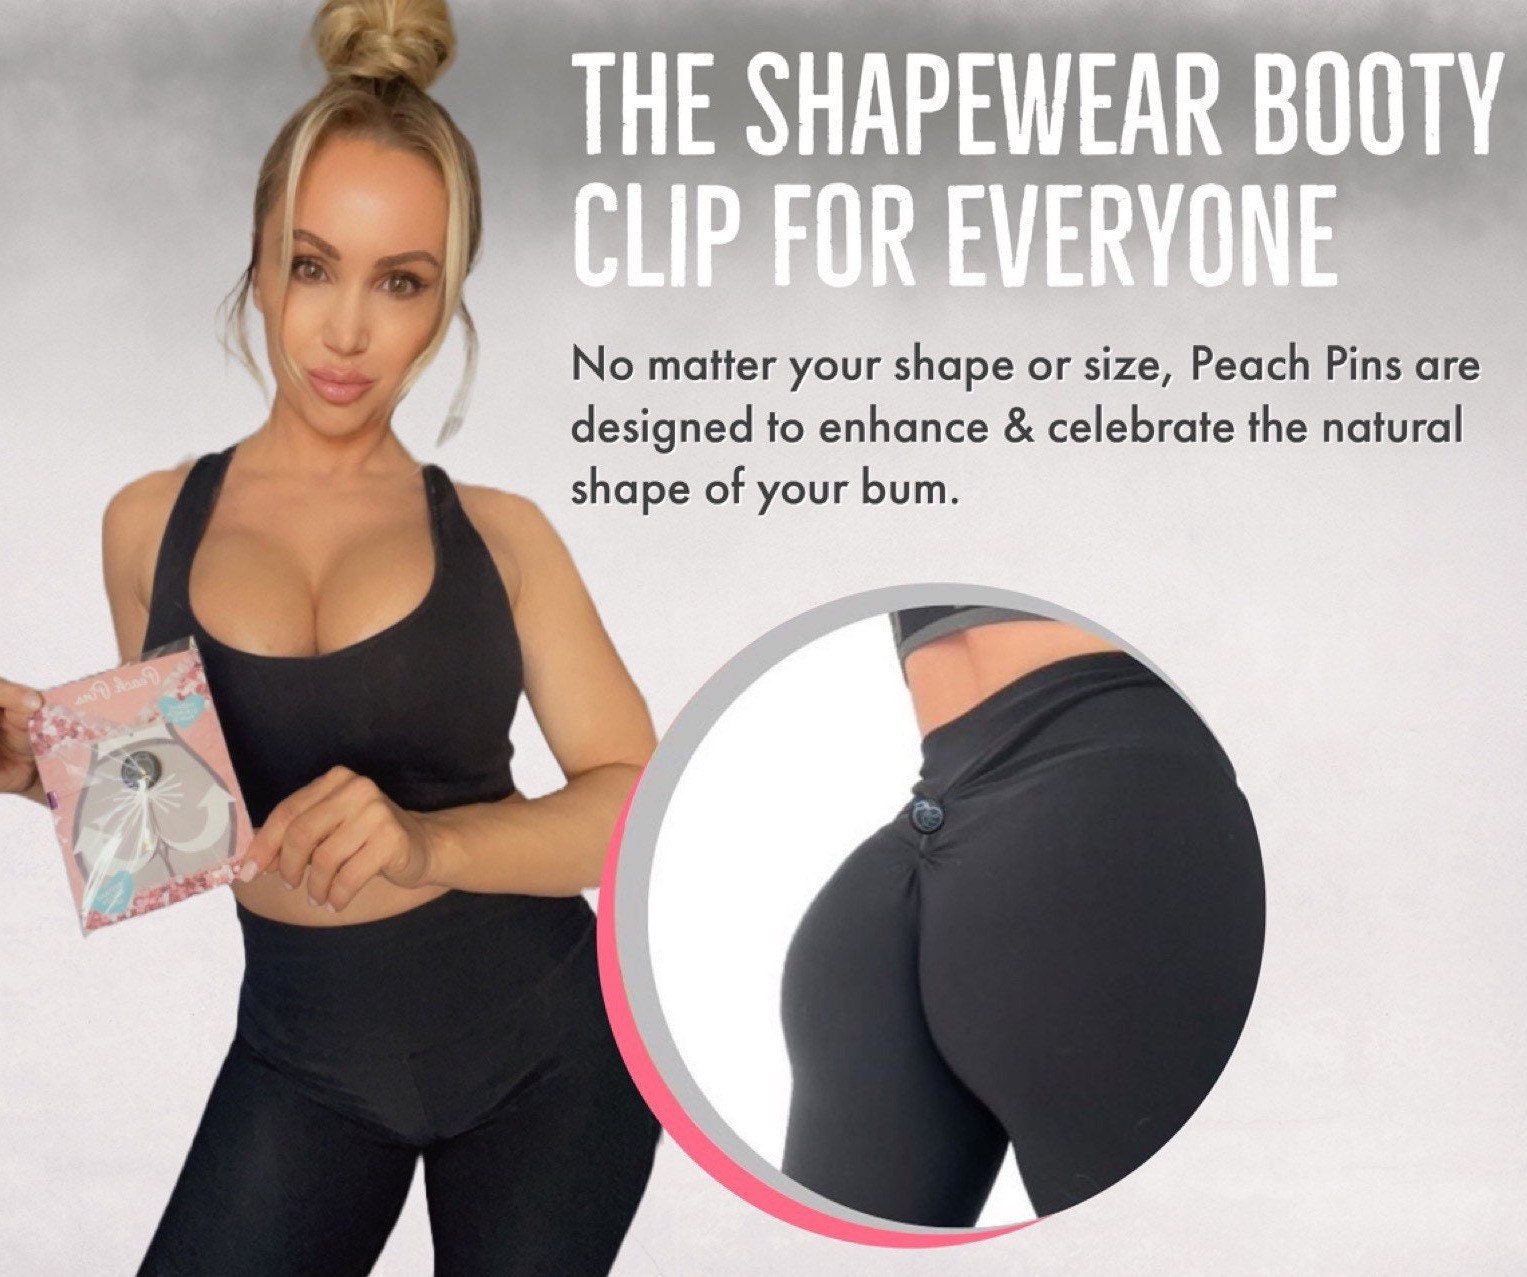 SHAPEWEAR Booty Clip - Peach Pins - Instant Booty Enhancing Clip